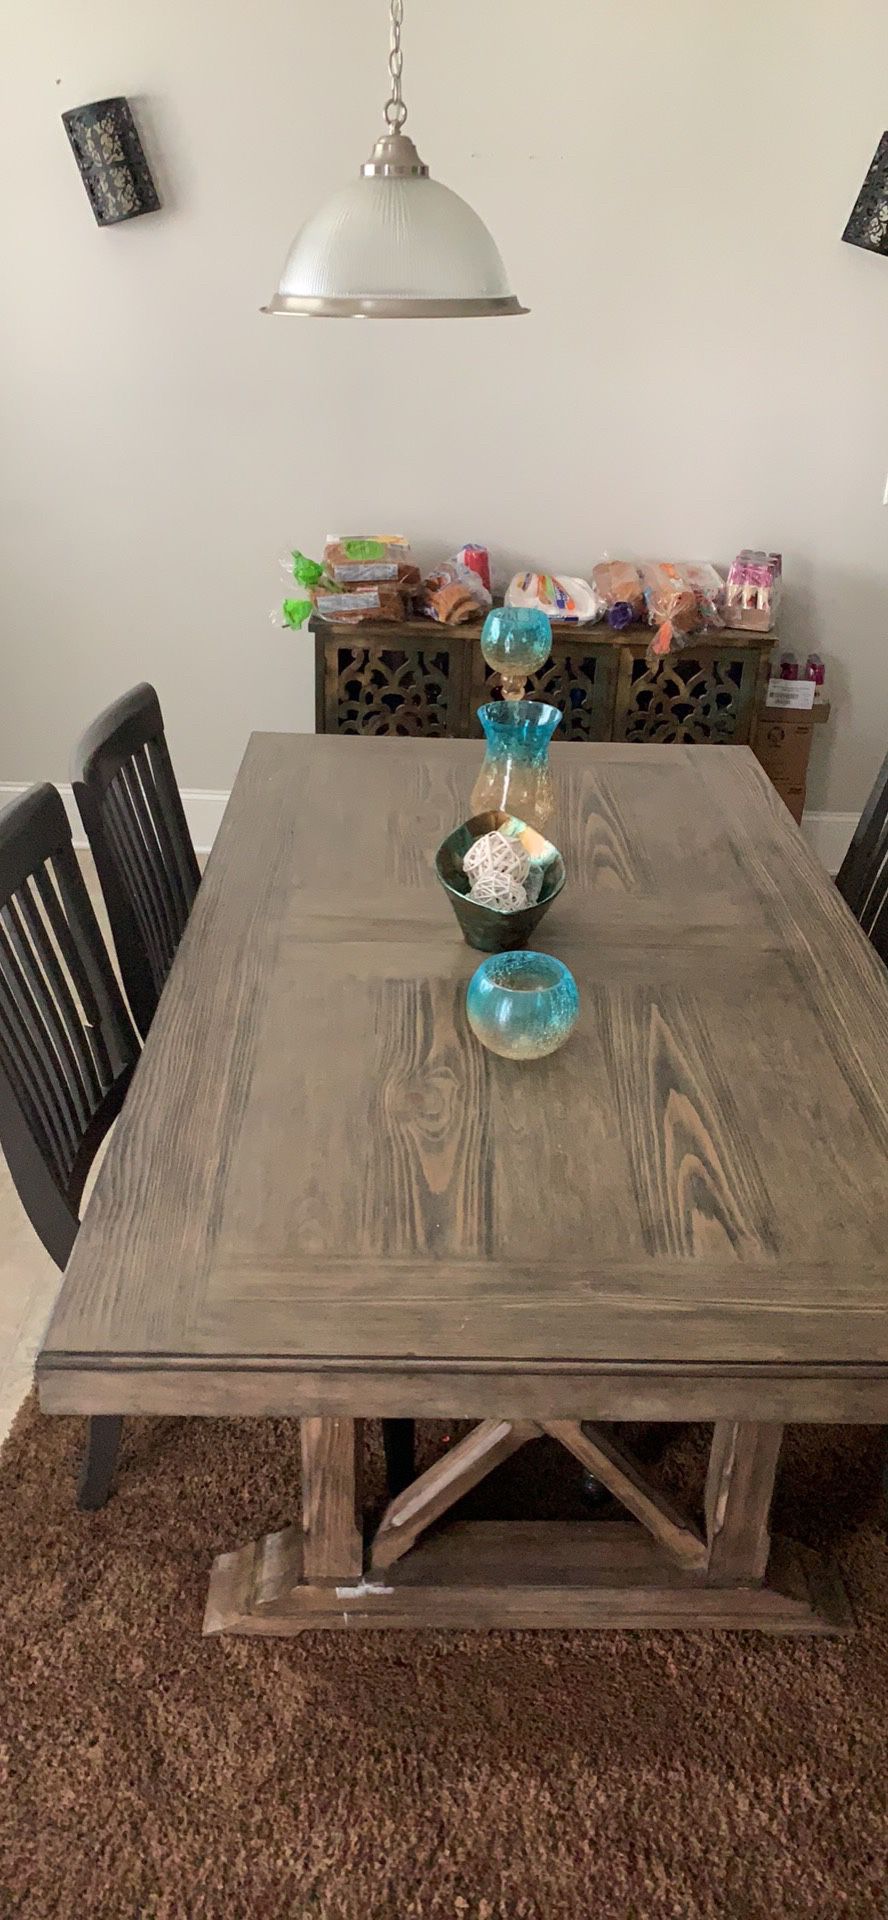 Breakfast table with 4 chairs one has a broke piece on back of one chair